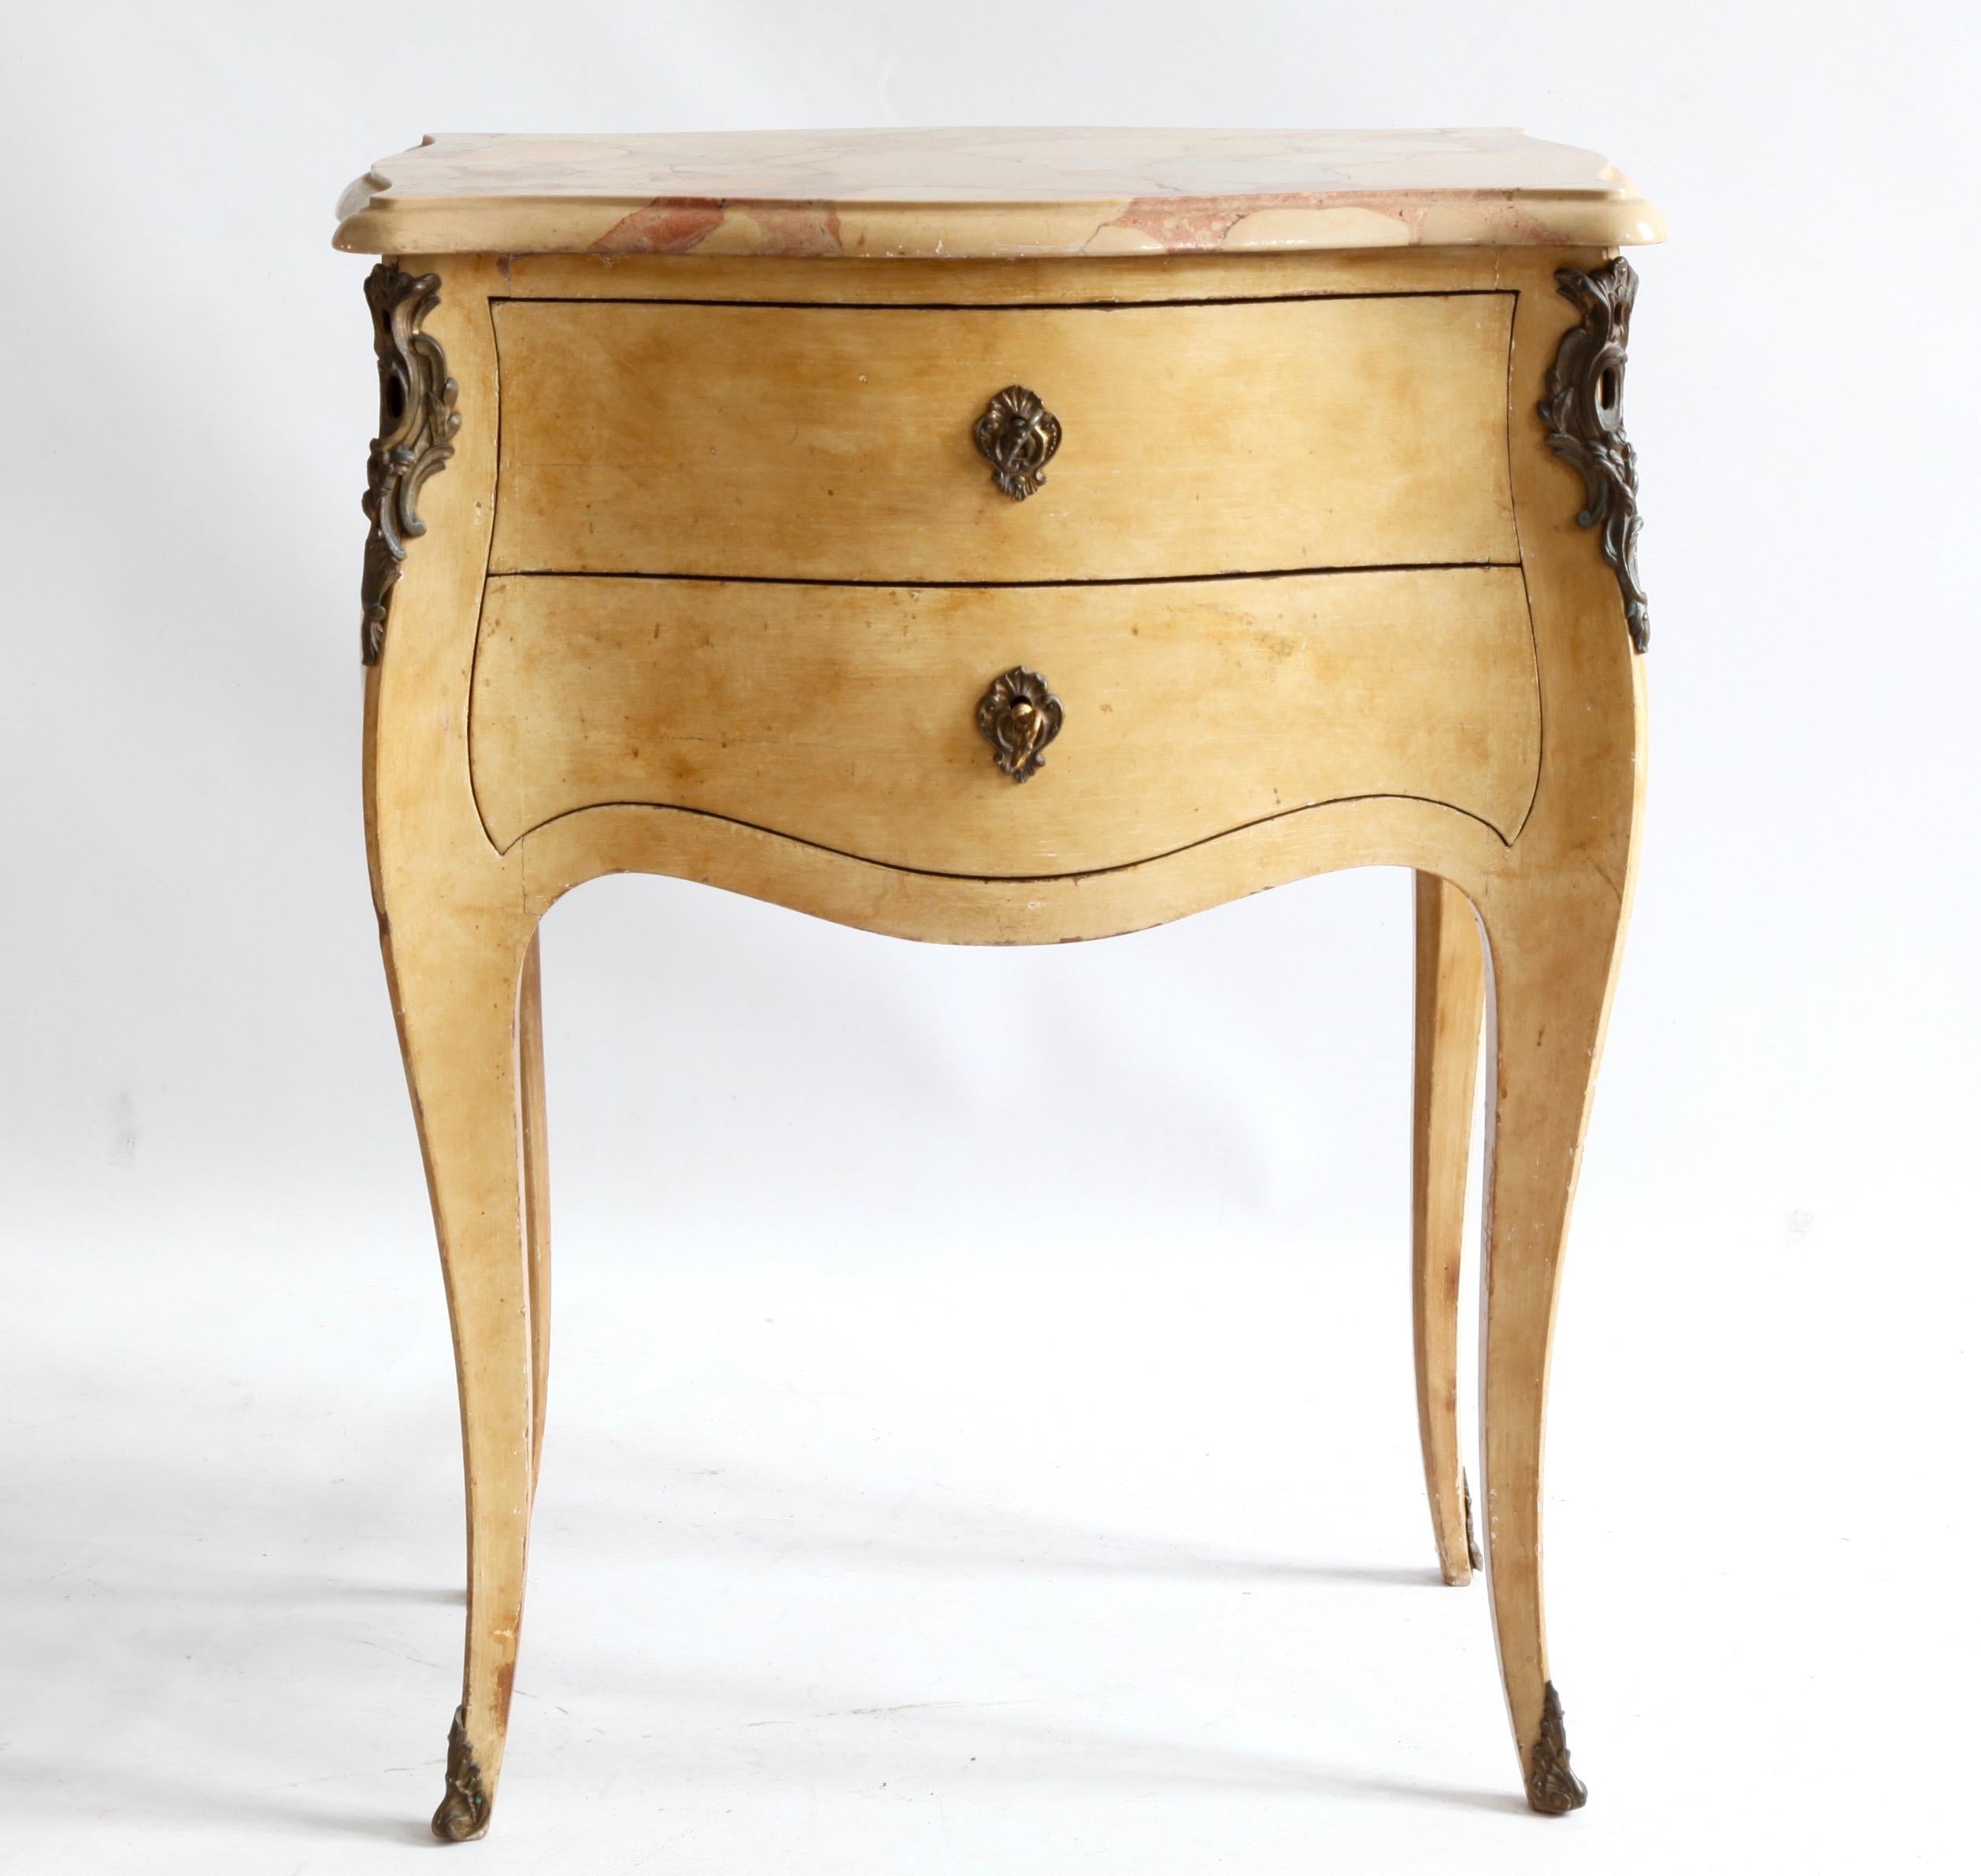 An early to mid-20th century French, Louis XV style, 'bombe' bedside table/small chest with its original beveled marble top in a warm yellow ochre and rose palette, complete with the original, decorative, bronze ormolu, including keys with locks,